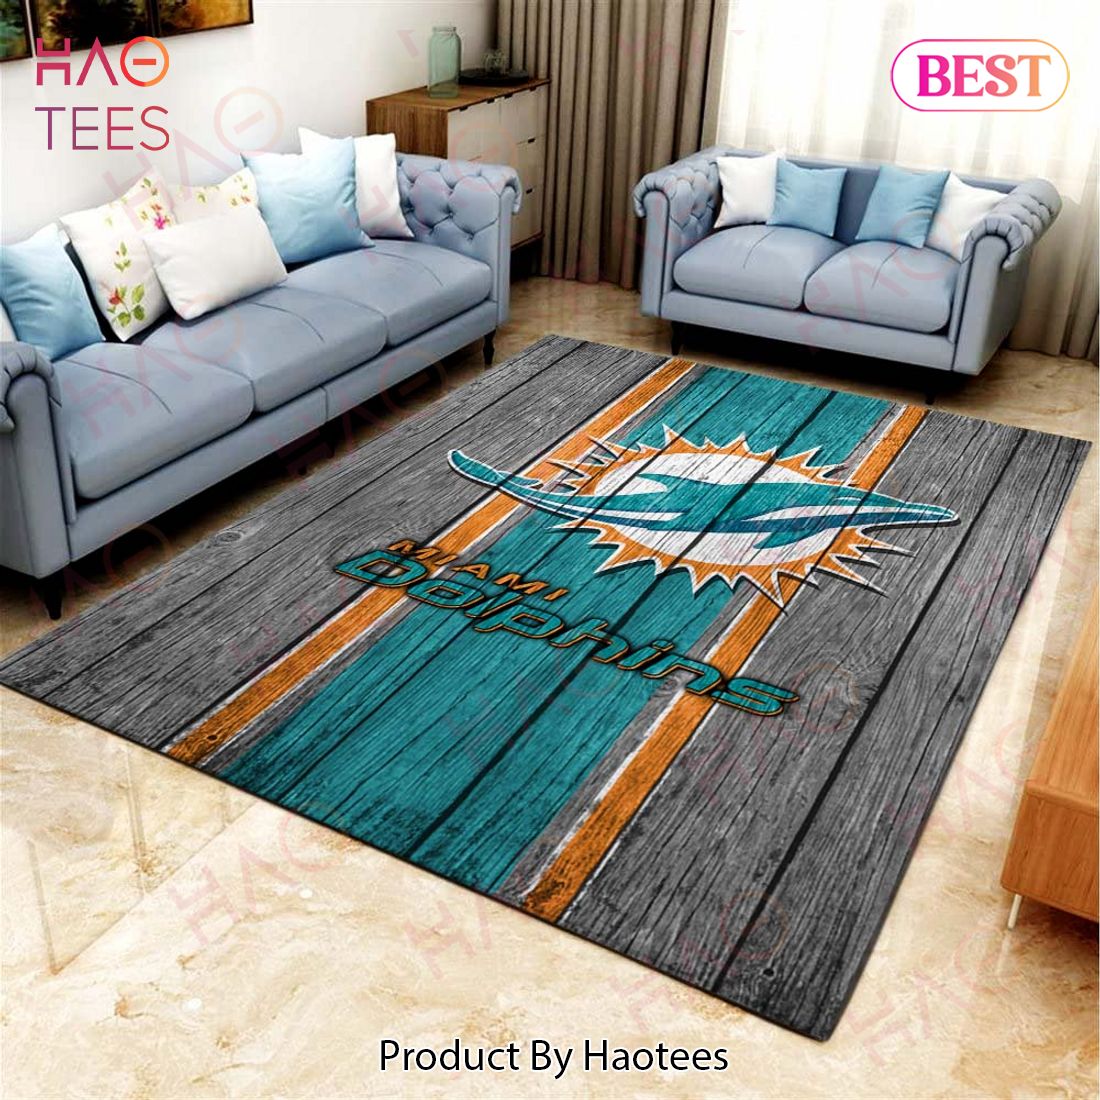 Miami Dolphins Football Team Nfl On Wood Living Room Carpet Kitchen Area Rugs